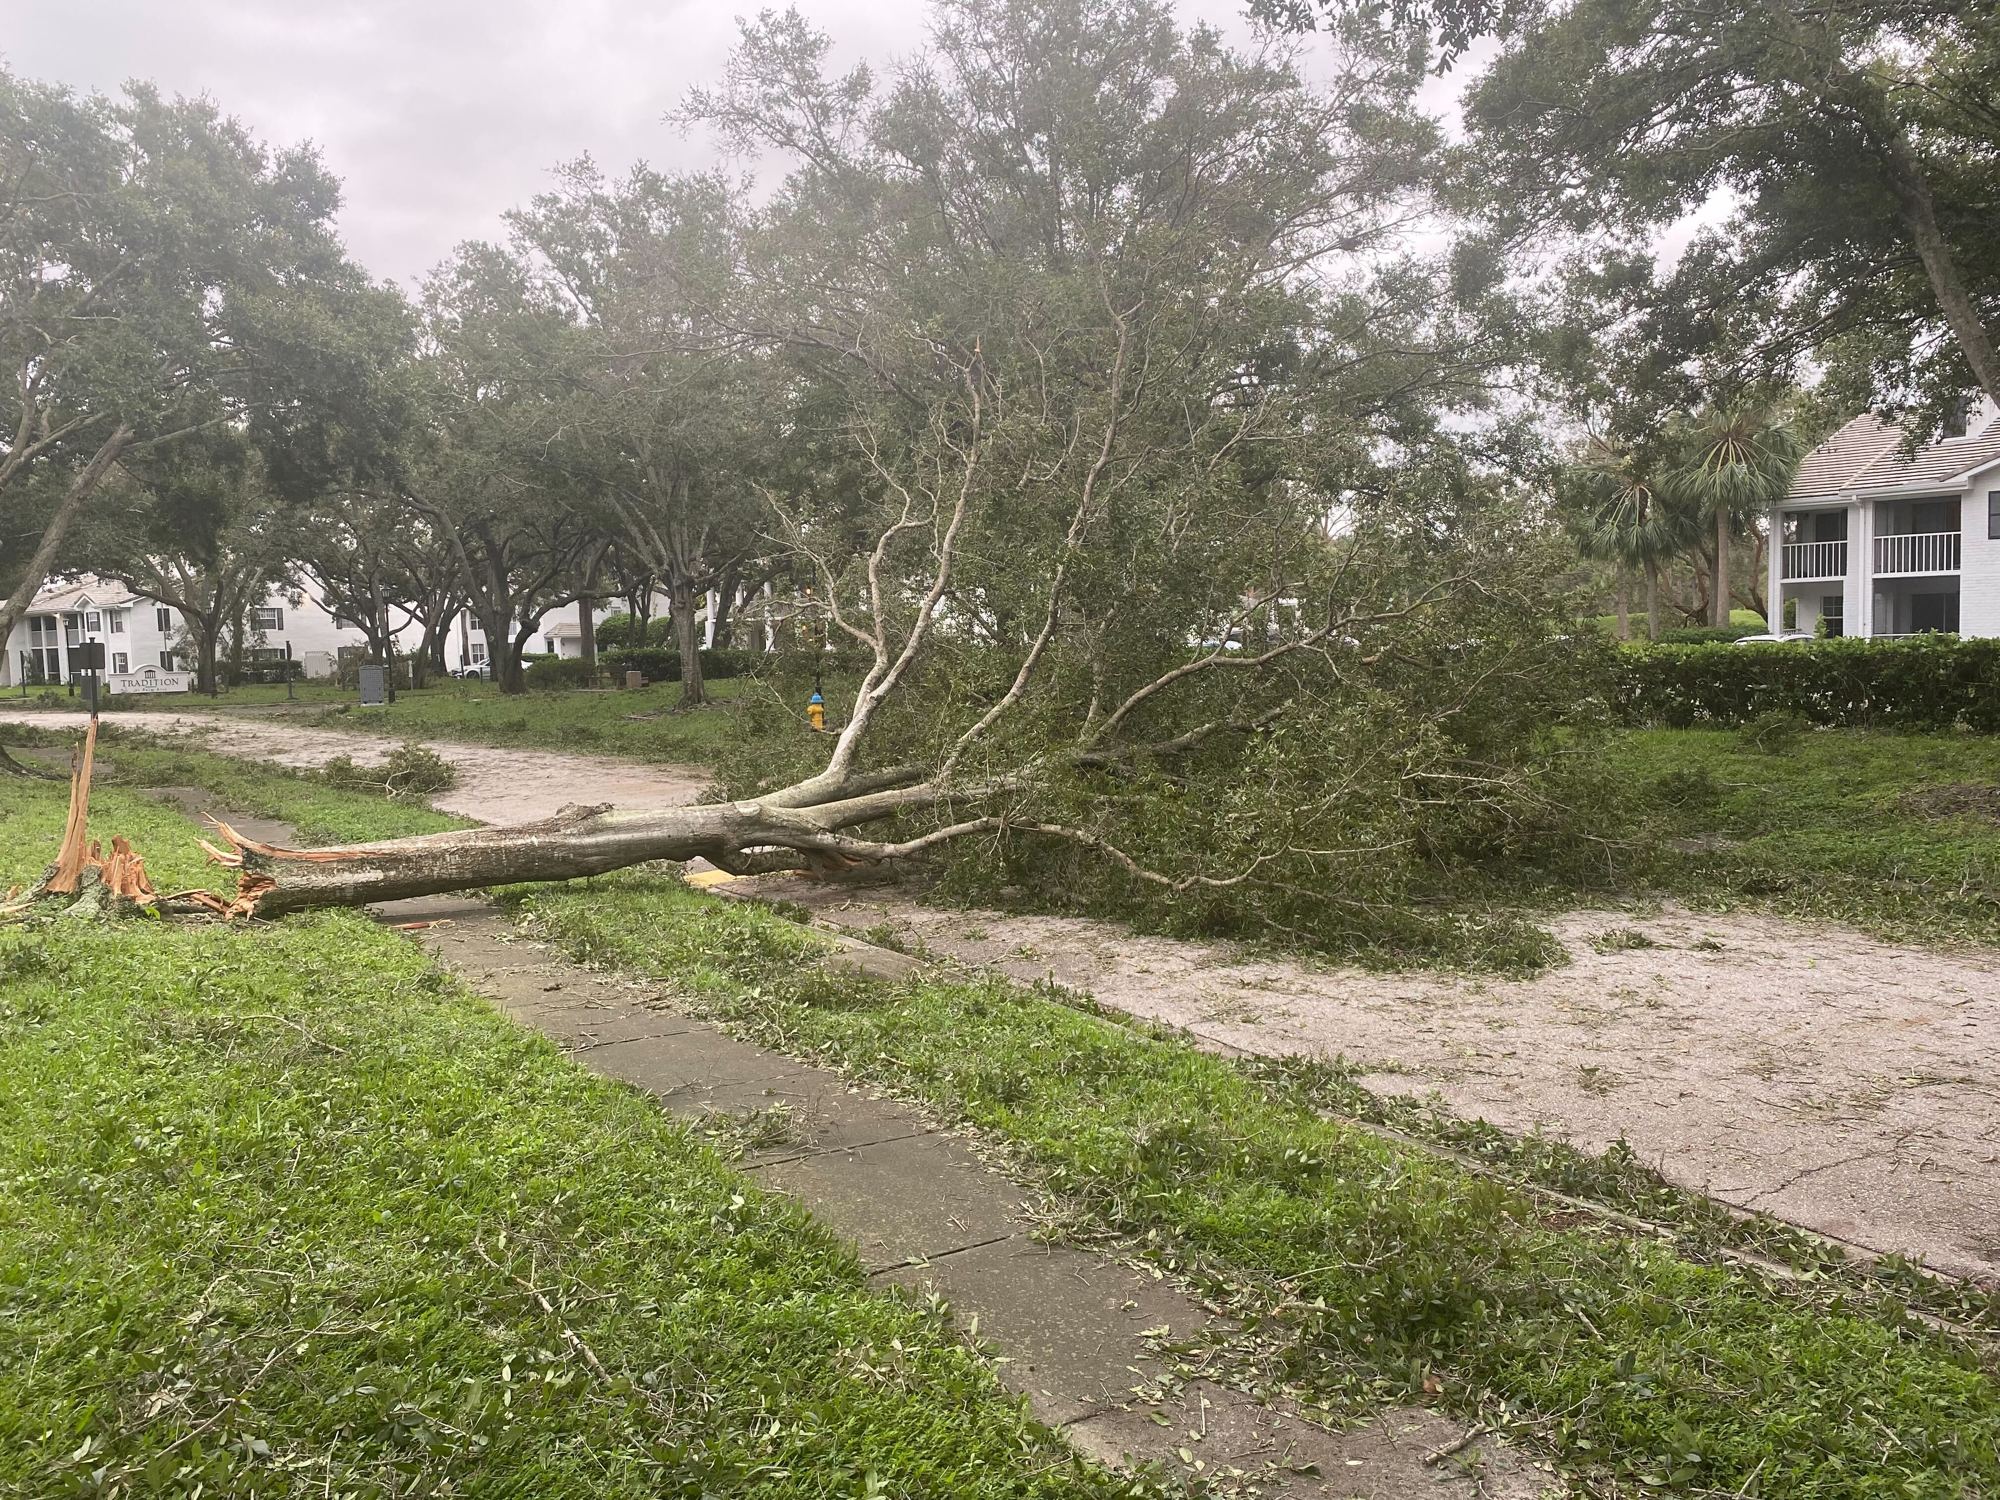 Fallen trees were seen in north Sarasota County on Thursday morning. (Photo by Spencer Fordin)